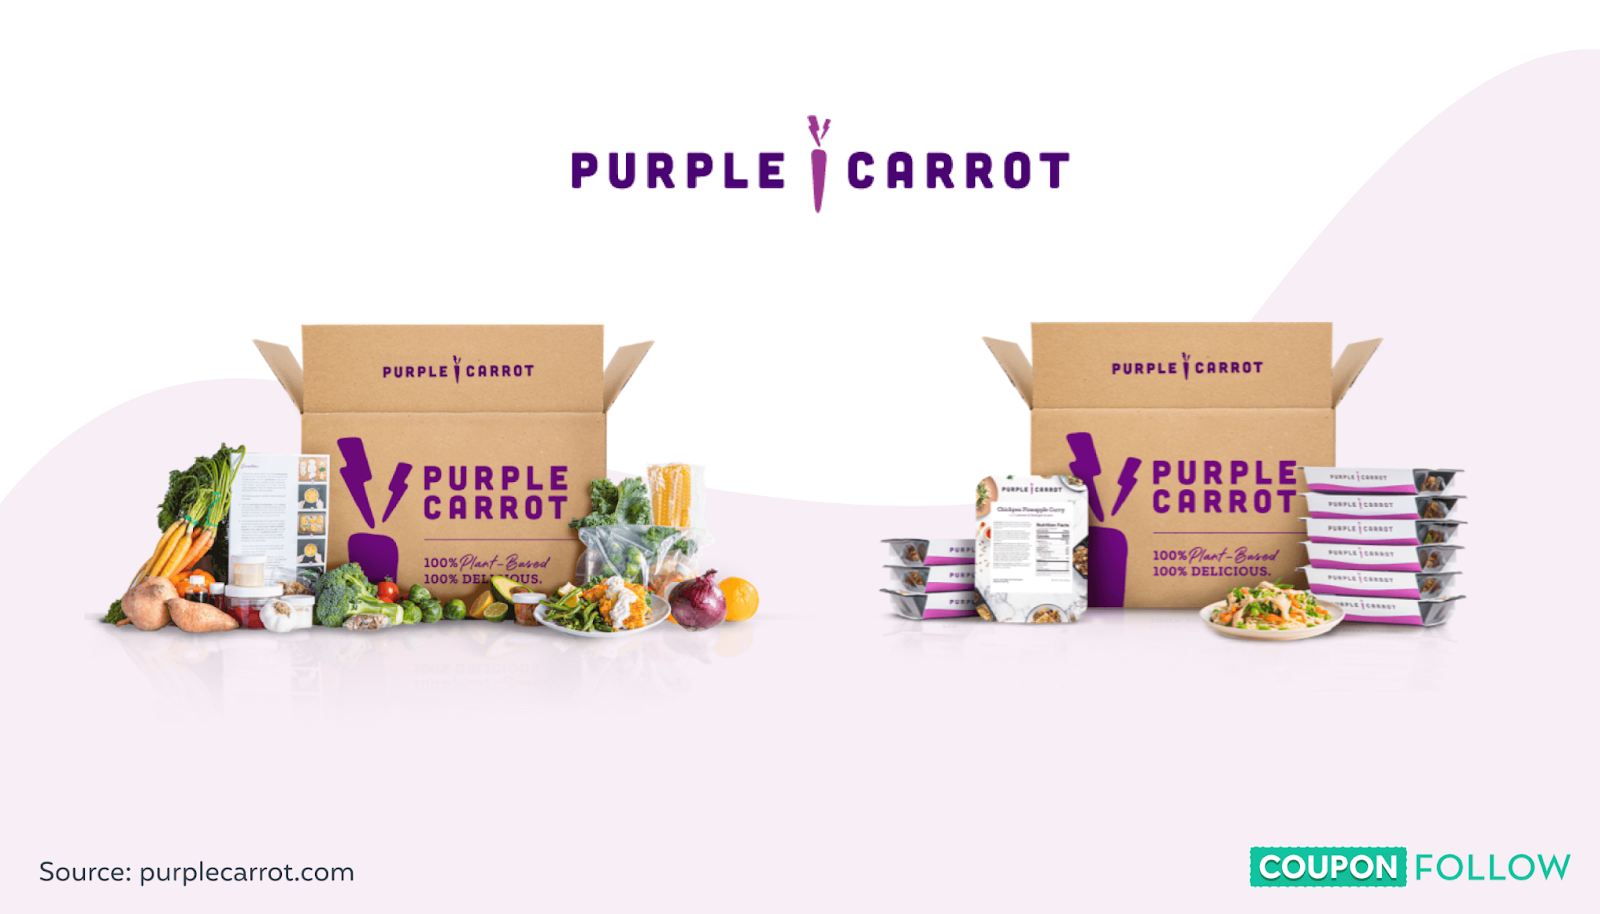 Illustration of what’s inside a Purple Carrot box